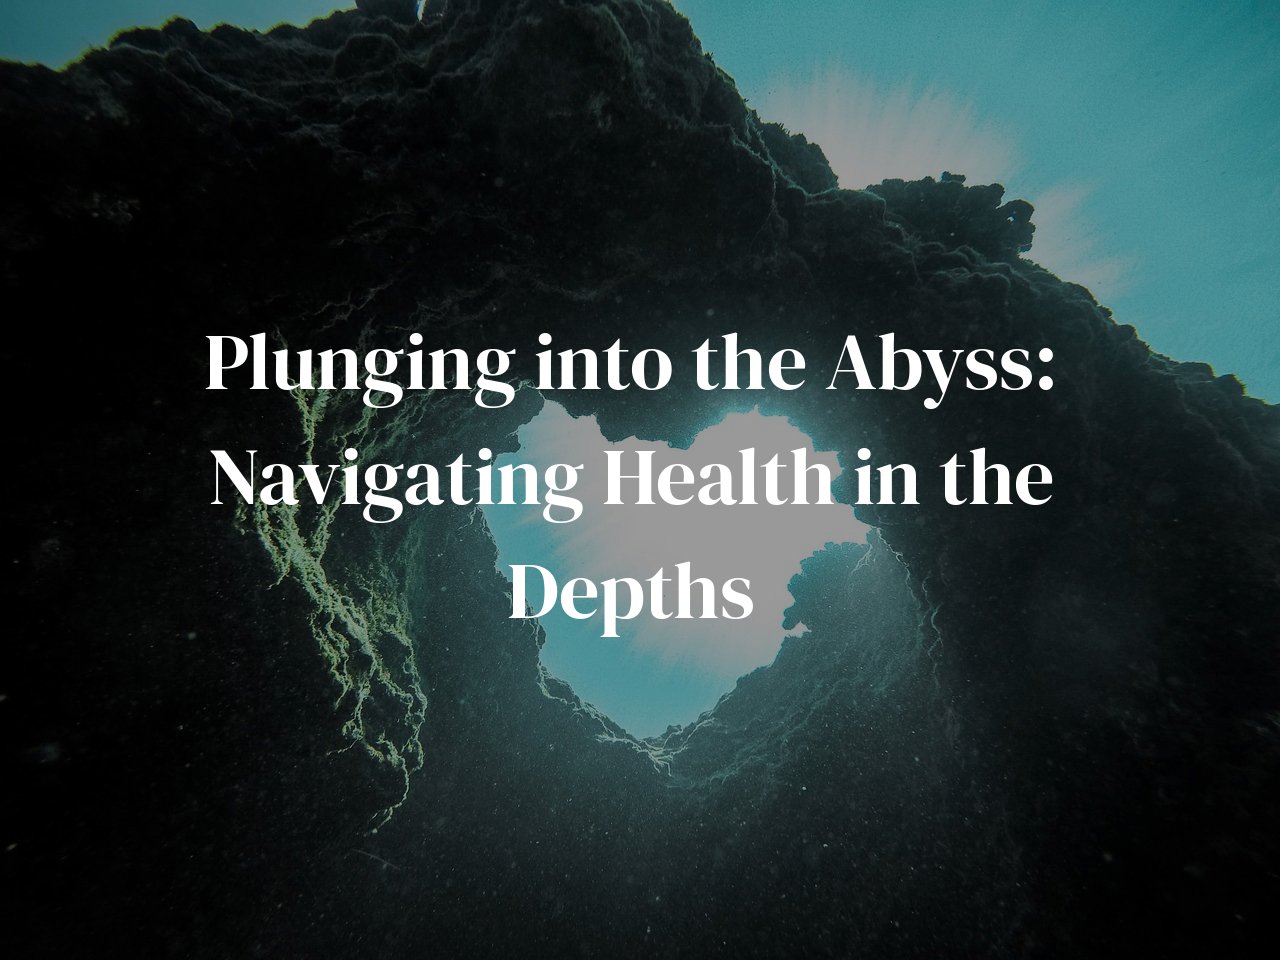 Plunging into the Abyss: Navigating Health in the Depths